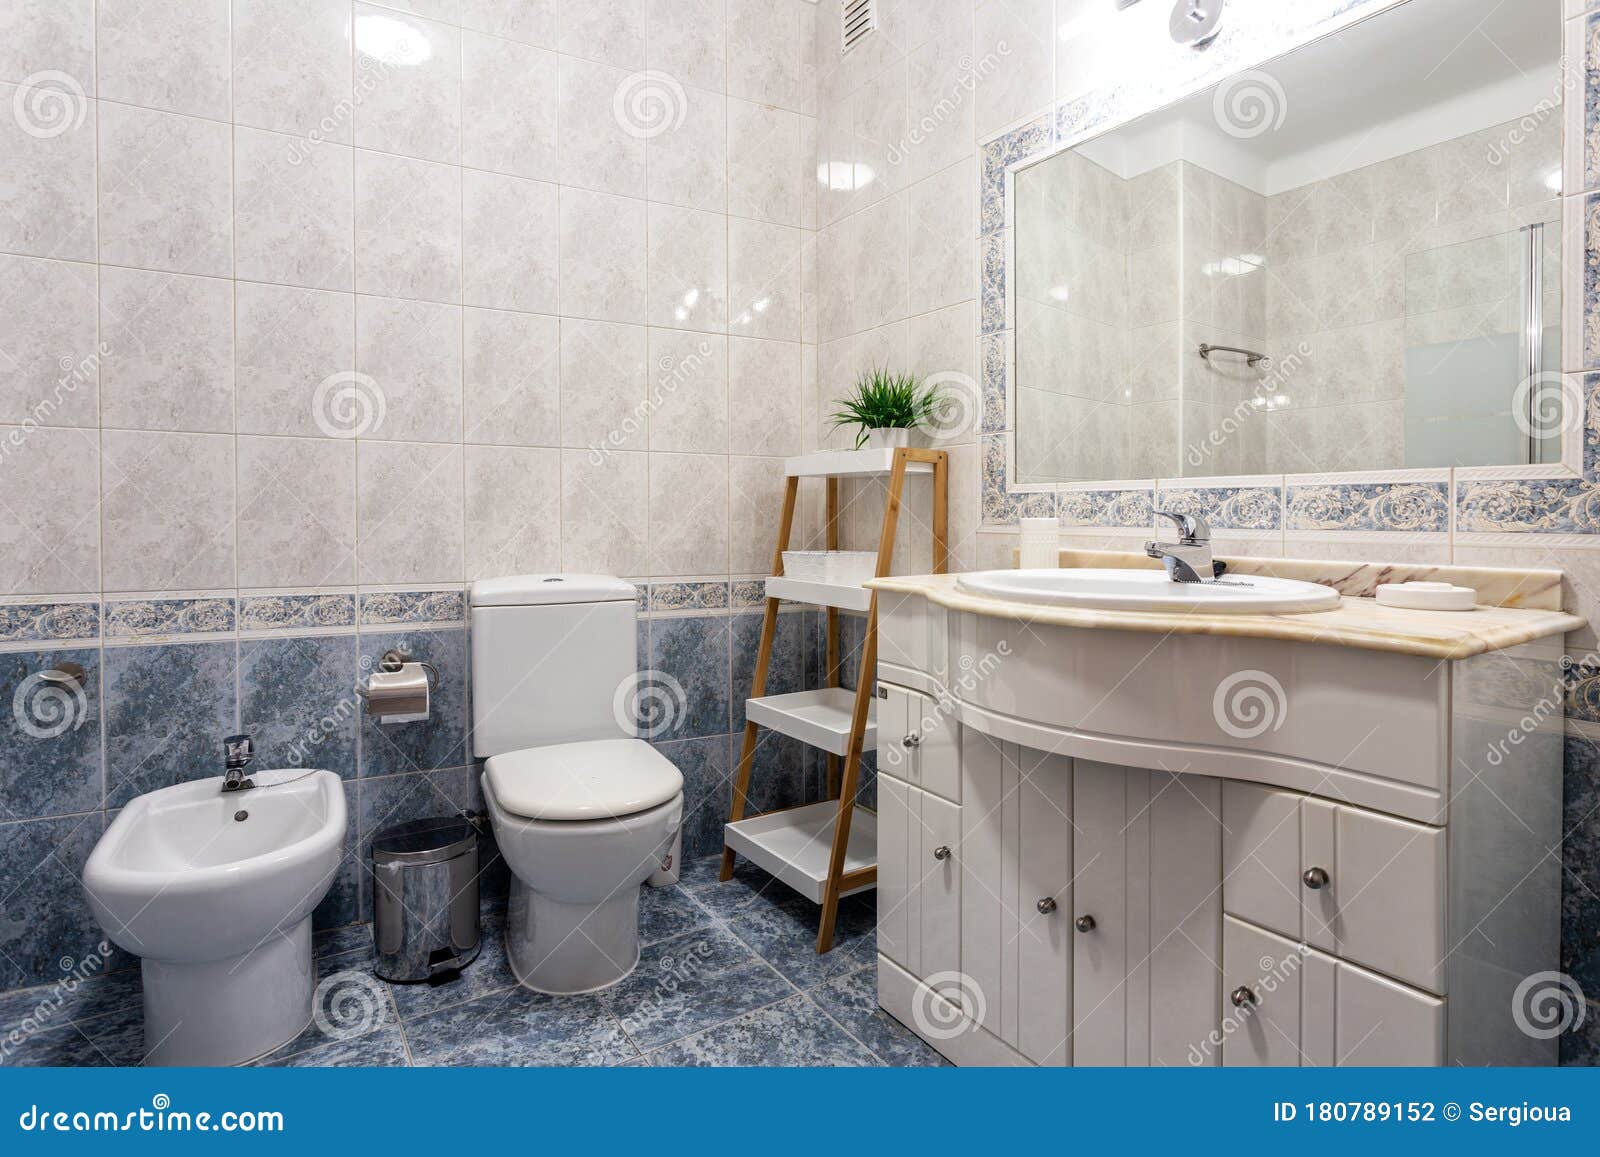 Modern Shower Room with a Booth. European Hotel Design. Stock Photo ...